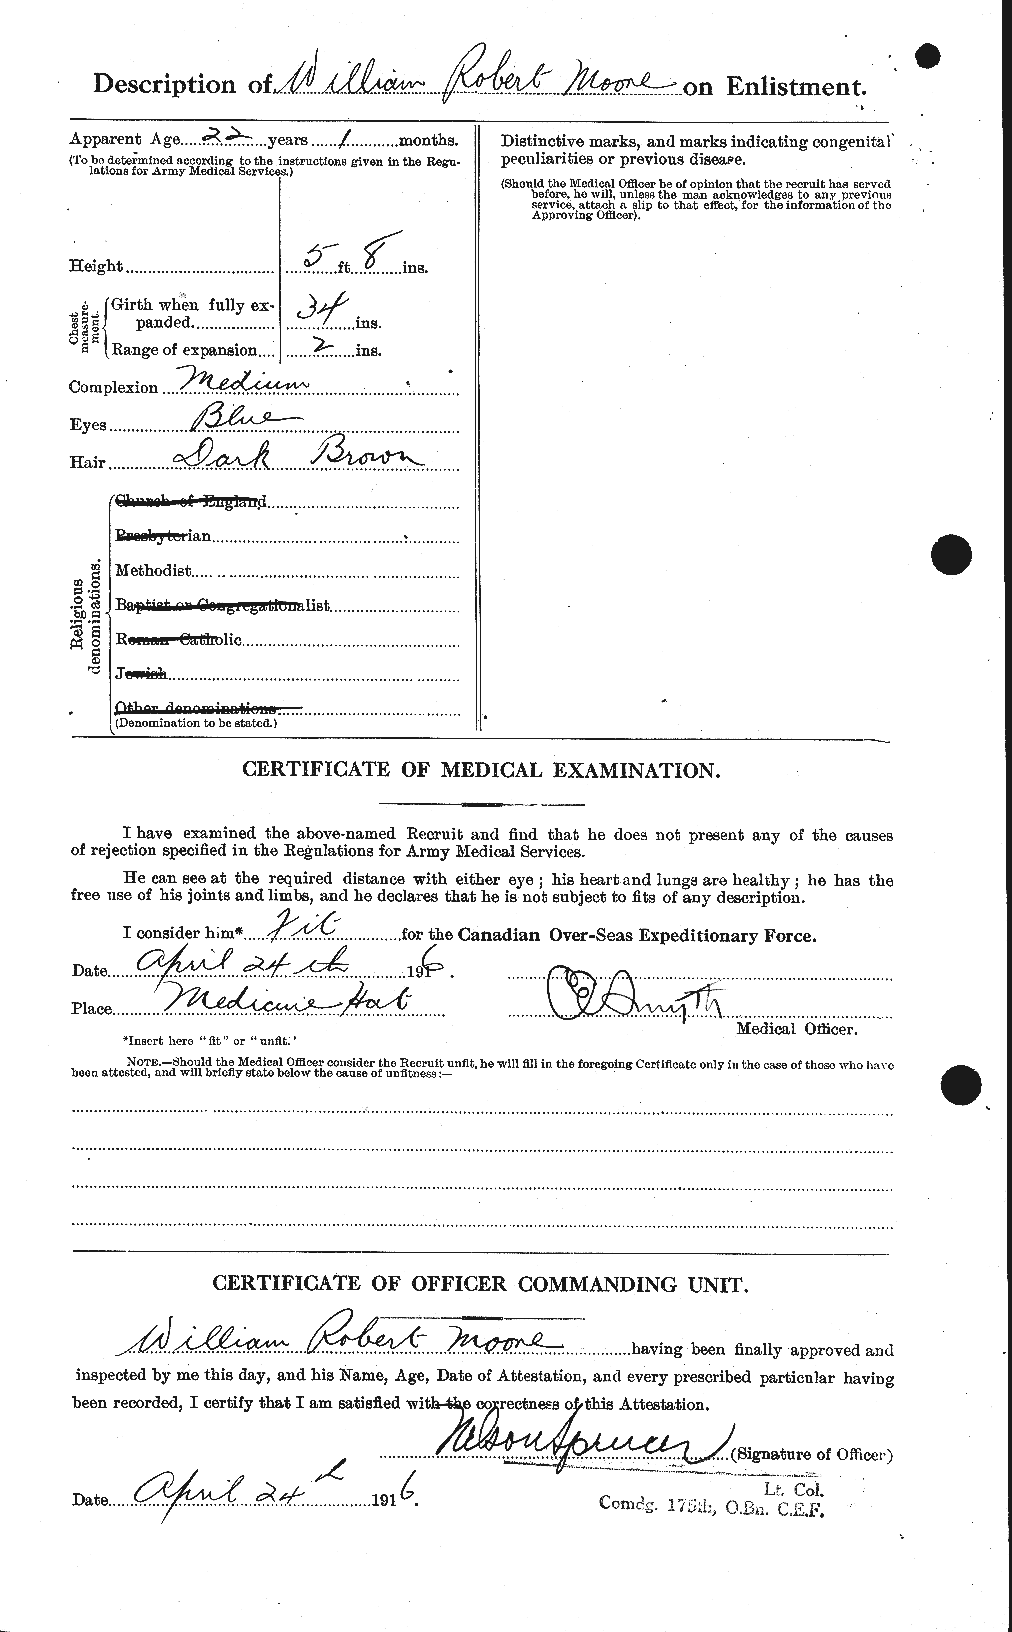 Personnel Records of the First World War - CEF 505861b